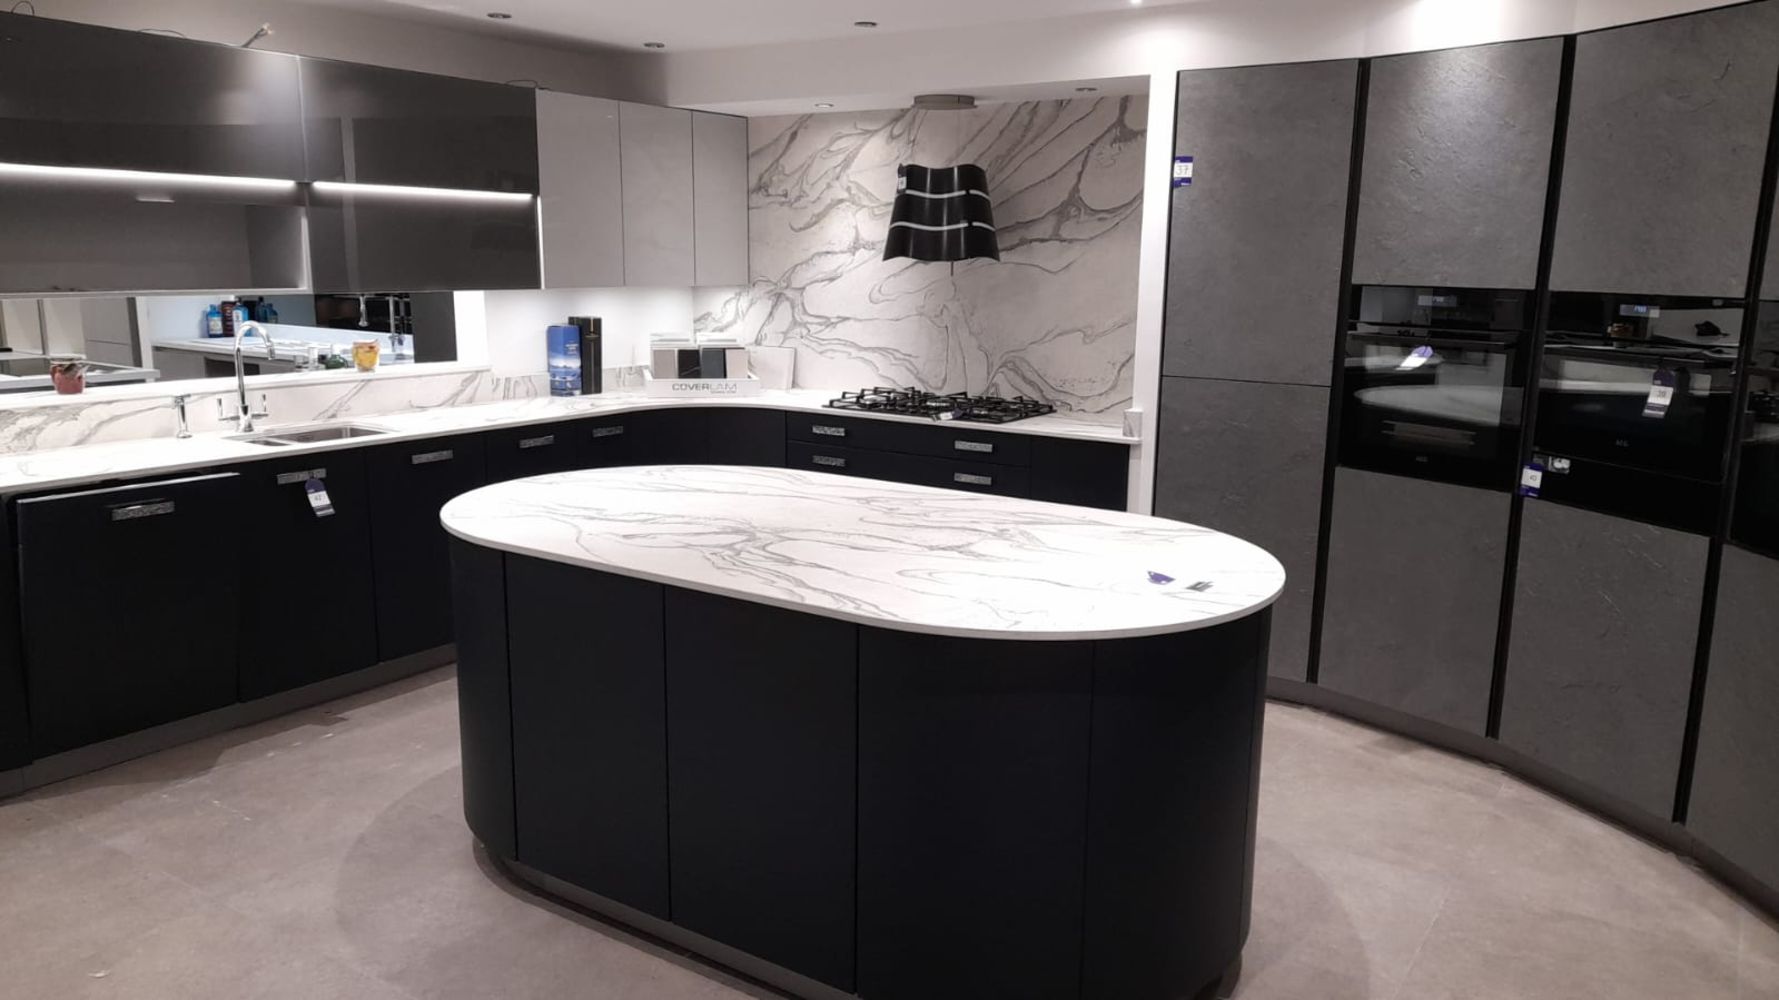 Exclusive Kitchens and Bathrooms from one of the Largest Showrooms in the North East to include appliances by AEG, Faber, Siemens, Miele etc.